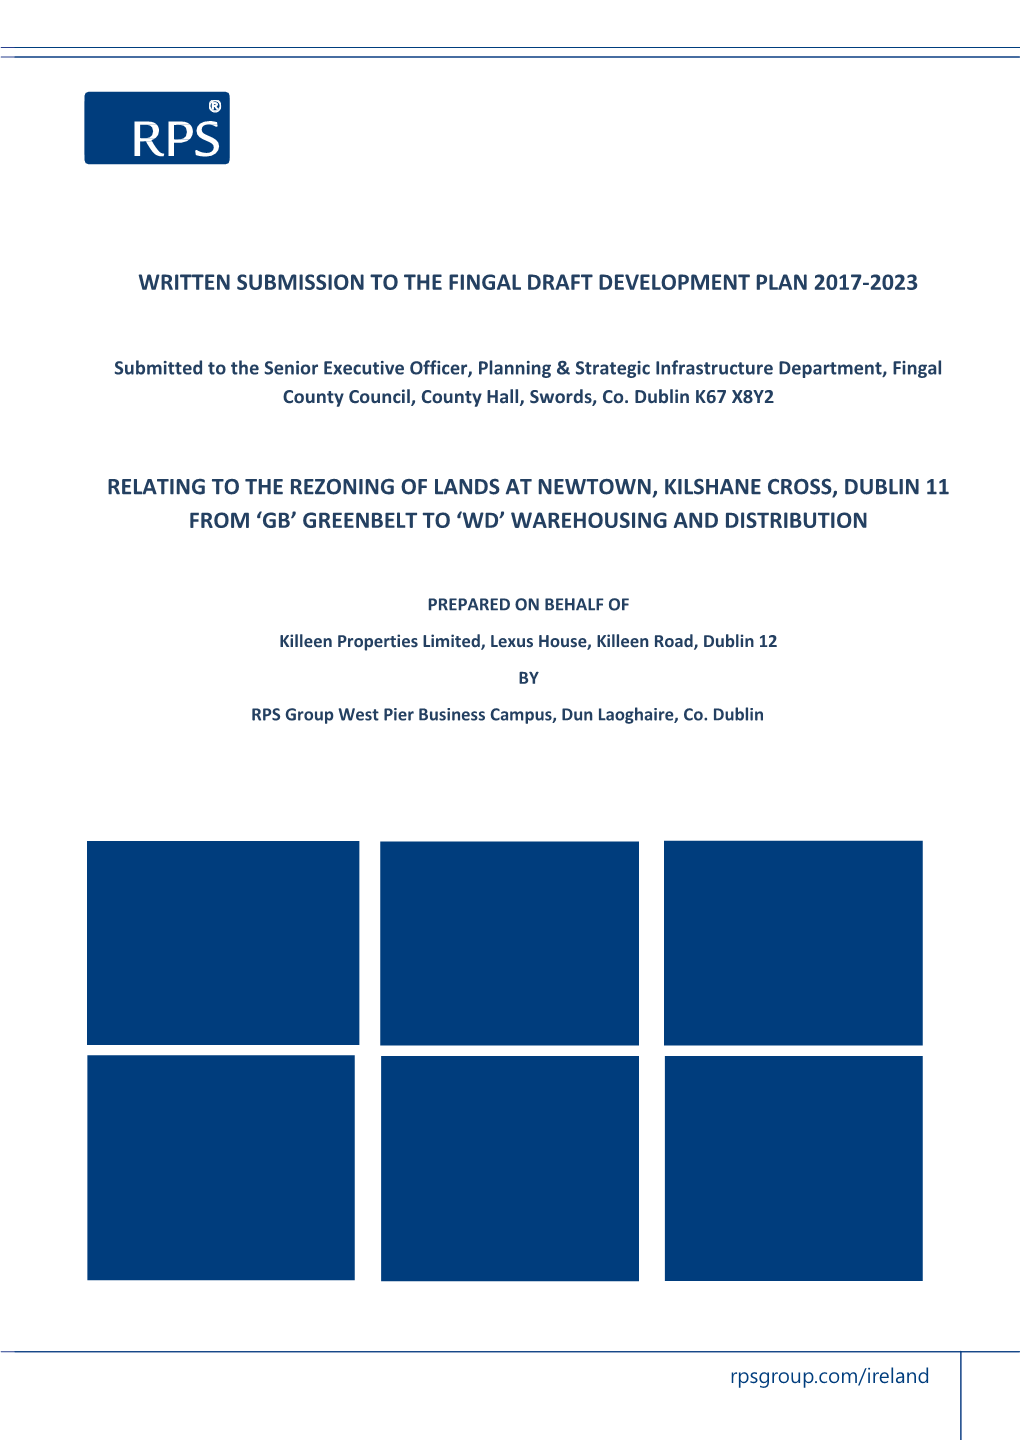 Written Submission to the Fingal Draft Development Plan 2017-2023